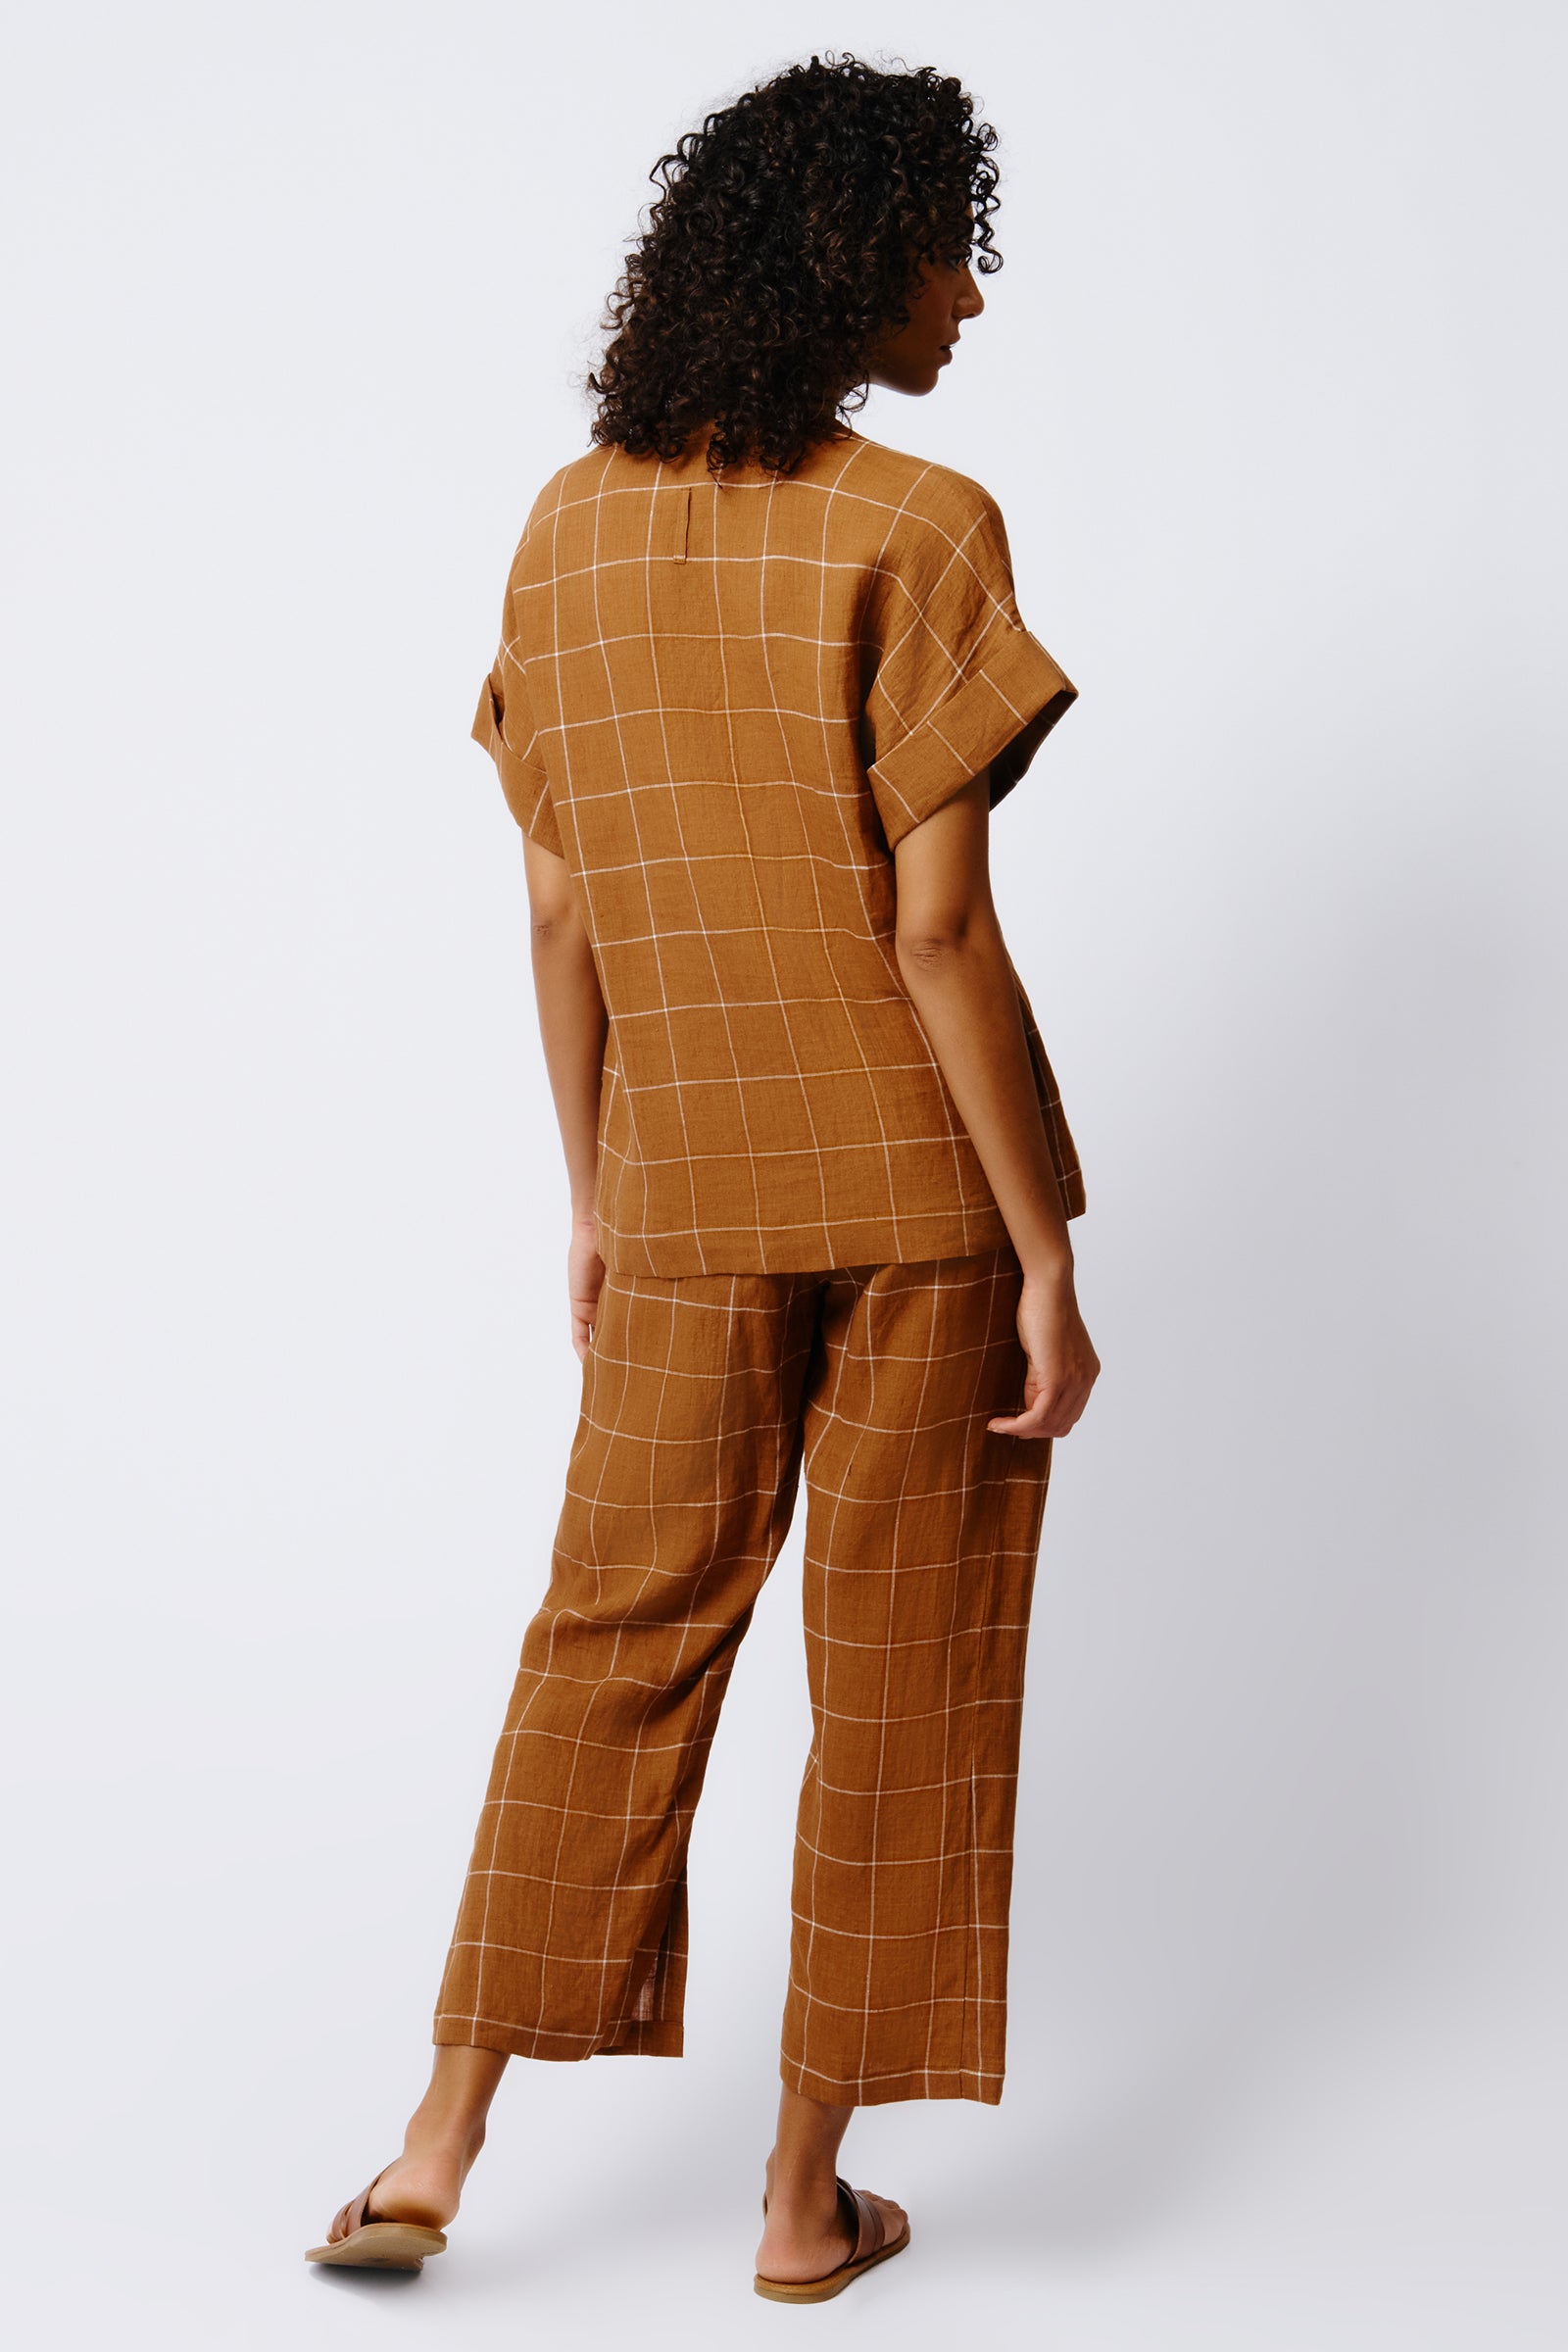 Kal Rieman Audrey Fold Front Kimono Top in Rust Windowpane on Model Front View Crop 2